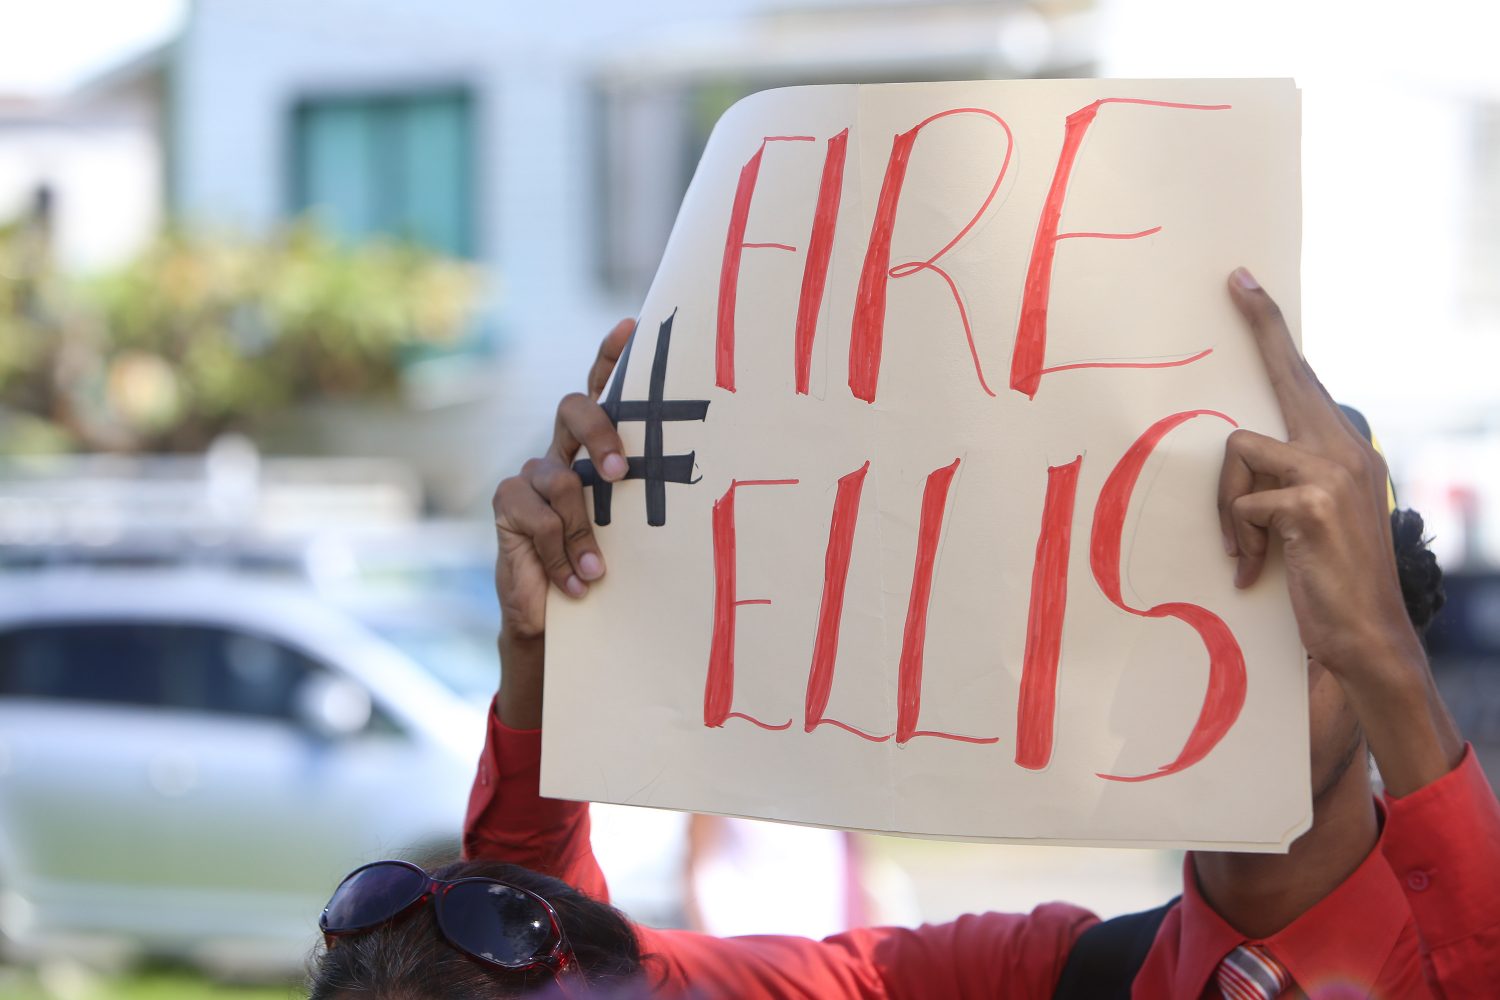 A protestor calling for the firing of Bishops’ High’s head teacher Winifred Ellis.